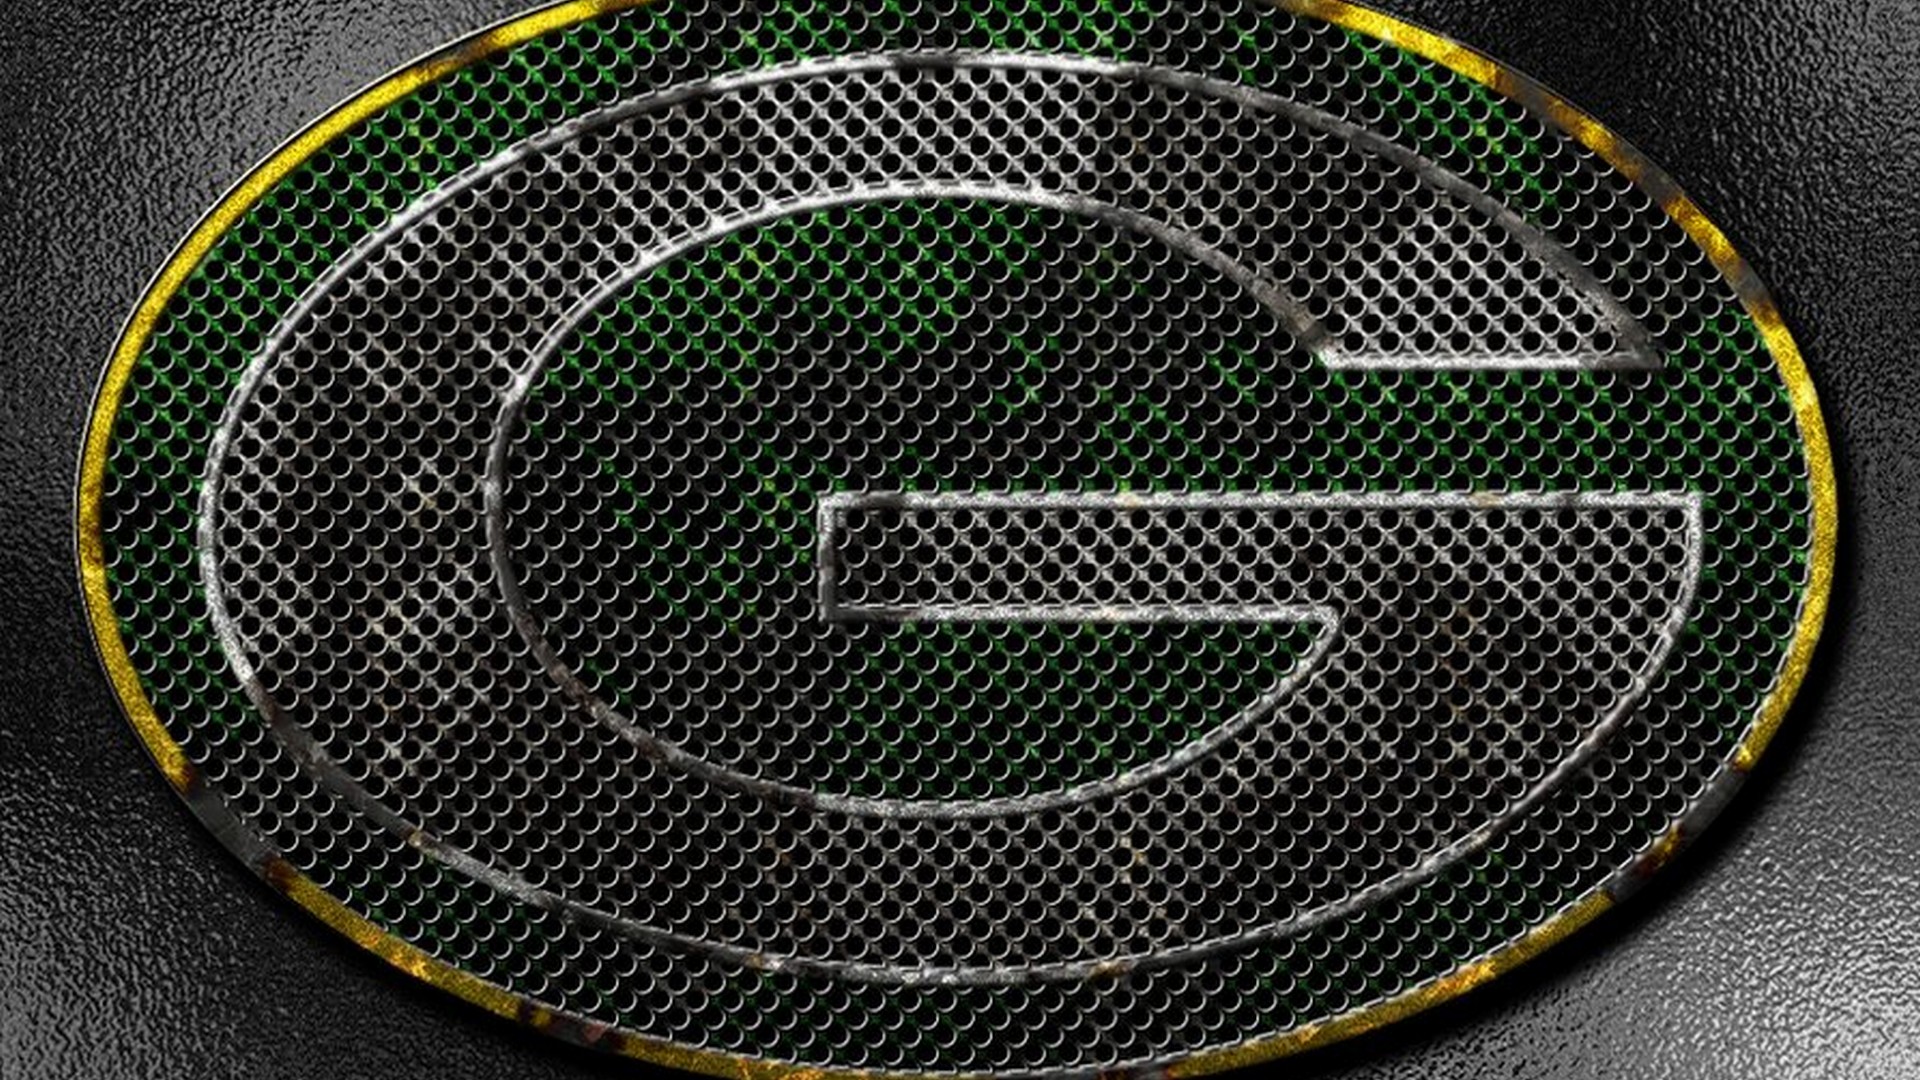 Wallpapers HD Green Bay Packers 1920x1080